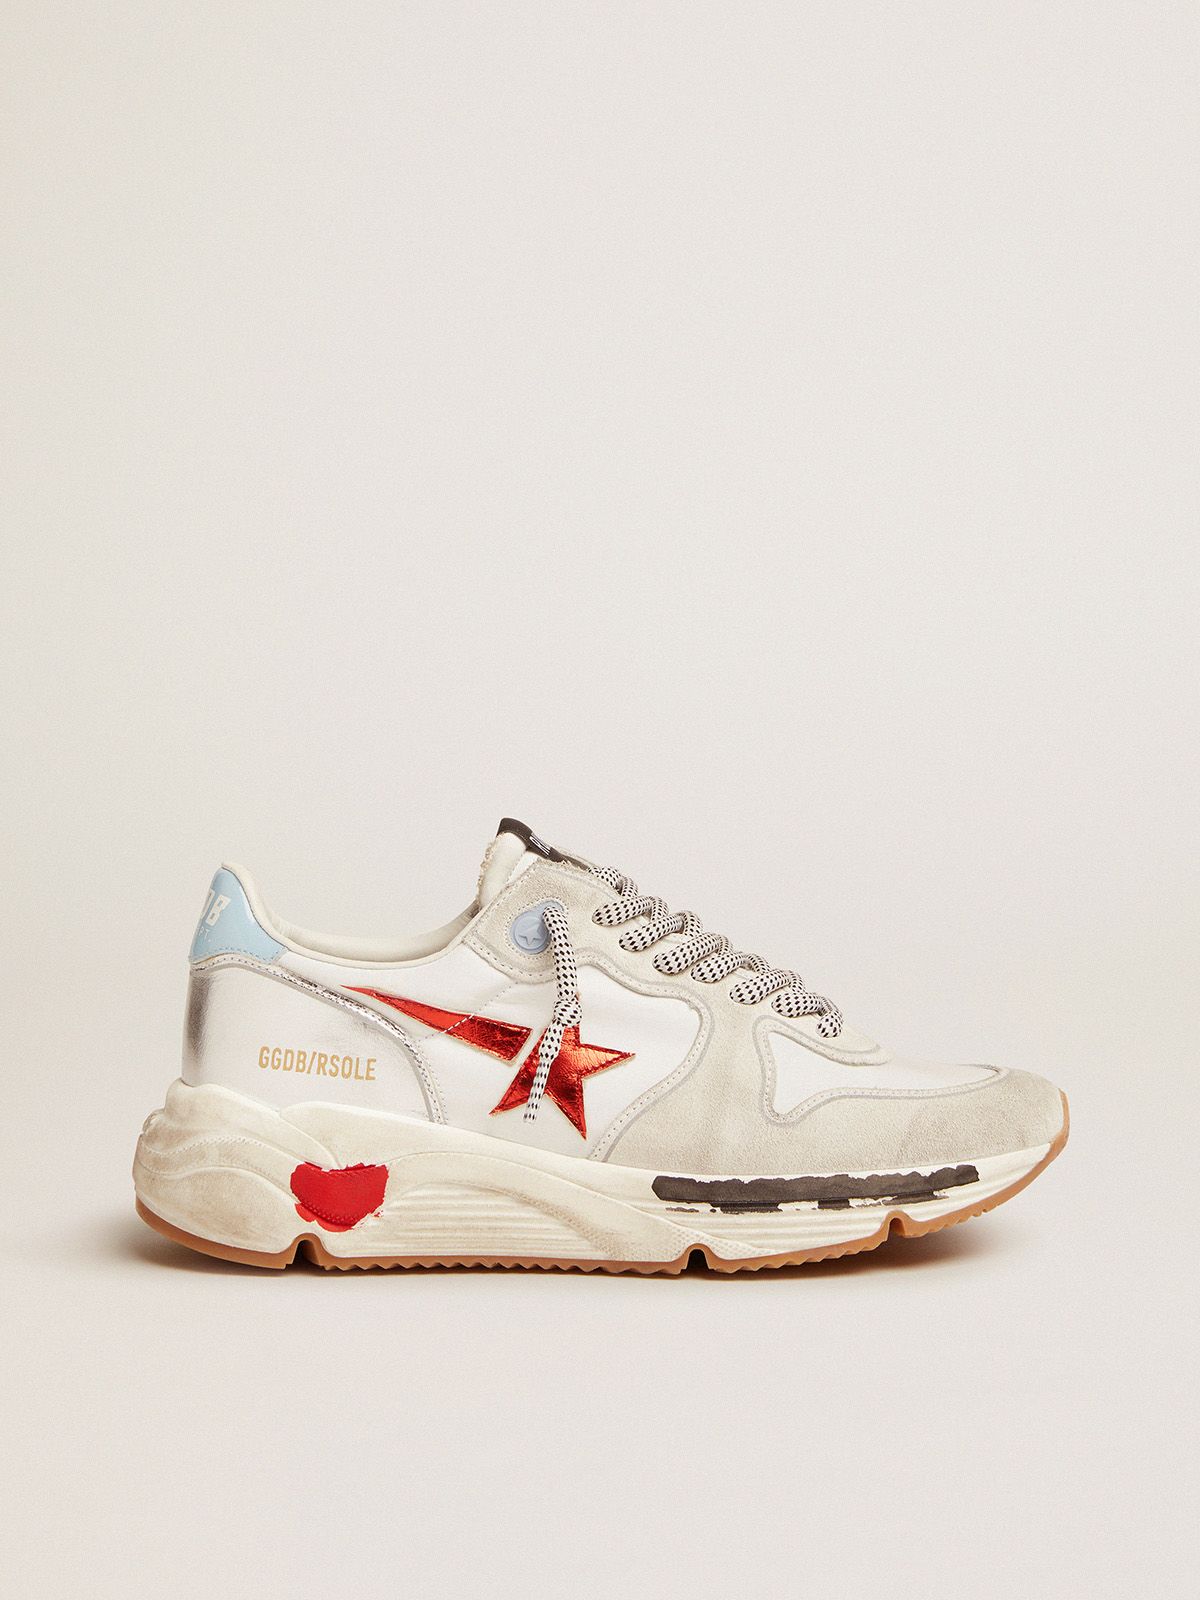 Running Sole sneakers in nylon and suede with red laminated leather star